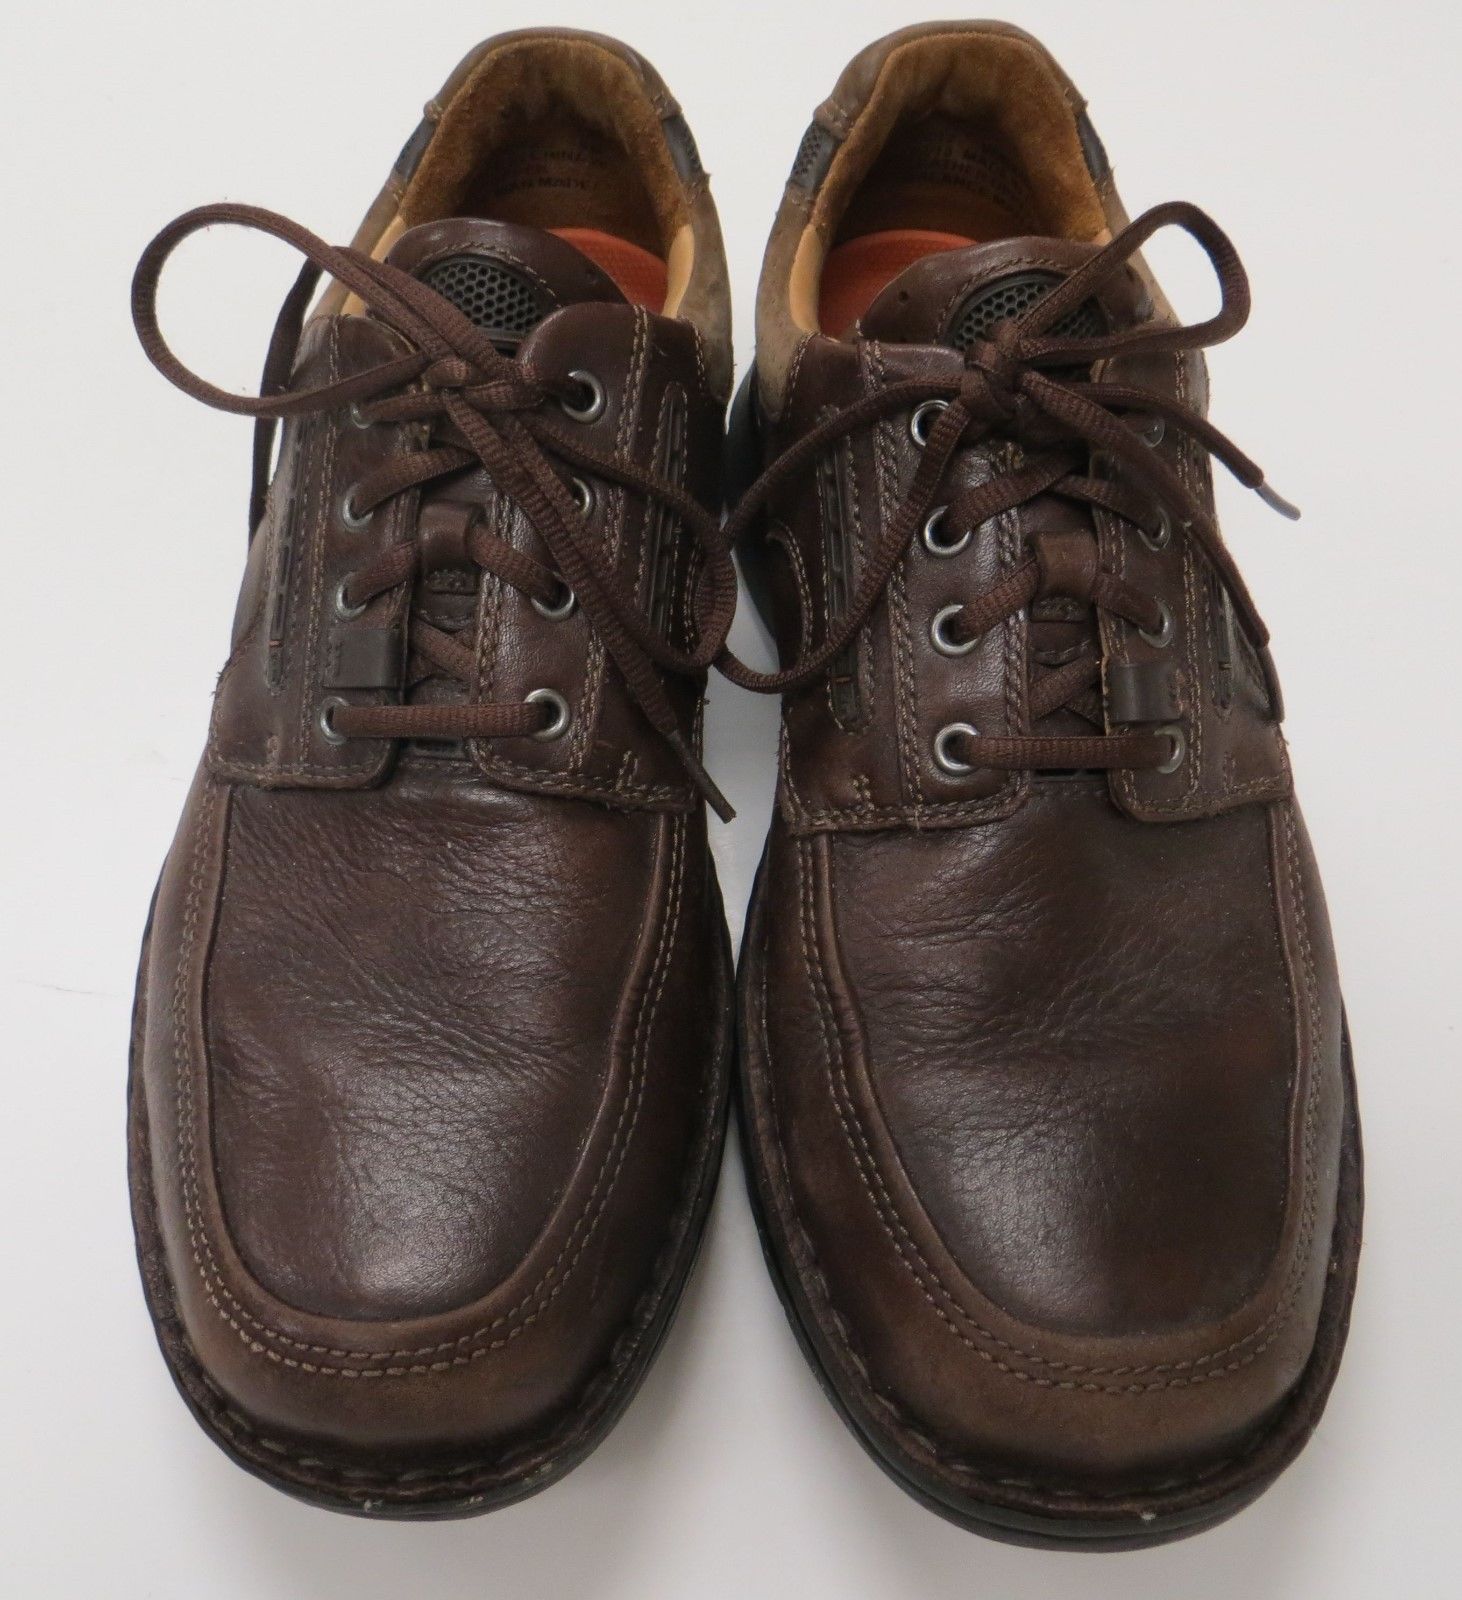 Clarks Unstructured Un.Bend Mens 9 M Brown Leather Casual Oxford Shoes ...